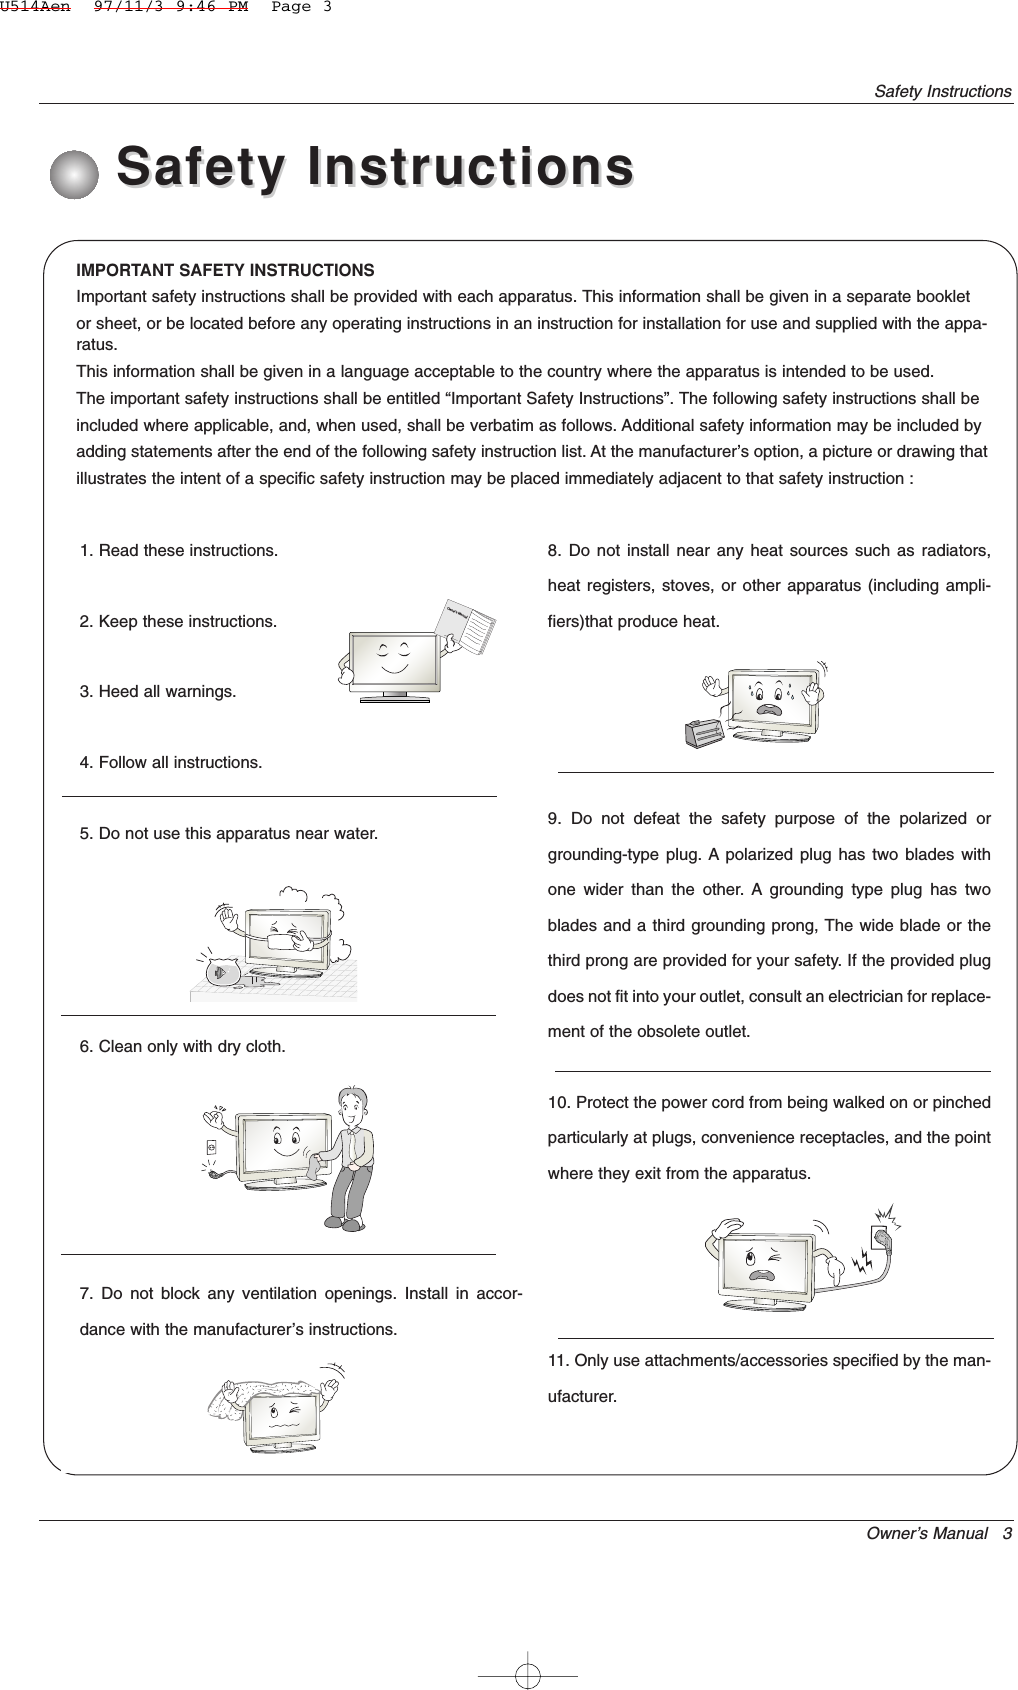 Owner’s Manual   3Safety InstructionsIMPORTANT SAFETY INSTRUCTIONSImportant safety instructions shall be provided with each apparatus. This information shall be given in a separate bookletor sheet, or be located before any operating instructions in an instruction for installation for use and supplied with the appa-ratus.This information shall be given in a language acceptable to the country where the apparatus is intended to be used.The important safety instructions shall be entitled “Important Safety Instructions”. The following safety instructions shall beincluded where applicable, and, when used, shall be verbatim as follows. Additional safety information may be included byadding statements after the end of the following safety instruction list. At the manufacturer’s option, a picture or drawing thatillustrates the intent of a specific safety instruction may be placed immediately adjacent to that safety instruction :1. Read these instructions.2. Keep these instructions.3. Heed all warnings.4. Follow all instructions.5. Do not use this apparatus near water.6. Clean only with dry cloth.7. Do not block any ventilation openings. Install in accor-dance with the manufacturer’s instructions.8. Do not install near any heat sources such as radiators,heat registers, stoves, or other apparatus (including ampli-fiers)that produce heat.9. Do not defeat the safety purpose of the polarized orgrounding-type plug. A polarized plug has two blades withone wider than the other. A grounding type plug has twoblades and a third grounding prong, The wide blade or thethird prong are provided for your safety. If the provided plugdoes not fit into your outlet, consult an electrician for replace-ment of the obsolete outlet.10. Protect the power cord from being walked on or pinchedparticularly at plugs, convenience receptacles, and the pointwhere they exit from the apparatus.11. Only use attachments/accessories specified by the man-ufacturer.Safety InstructionsSafety InstructionsOwner&apos;s ManualU514Aen  97/11/3 9:46 PM  Page 3